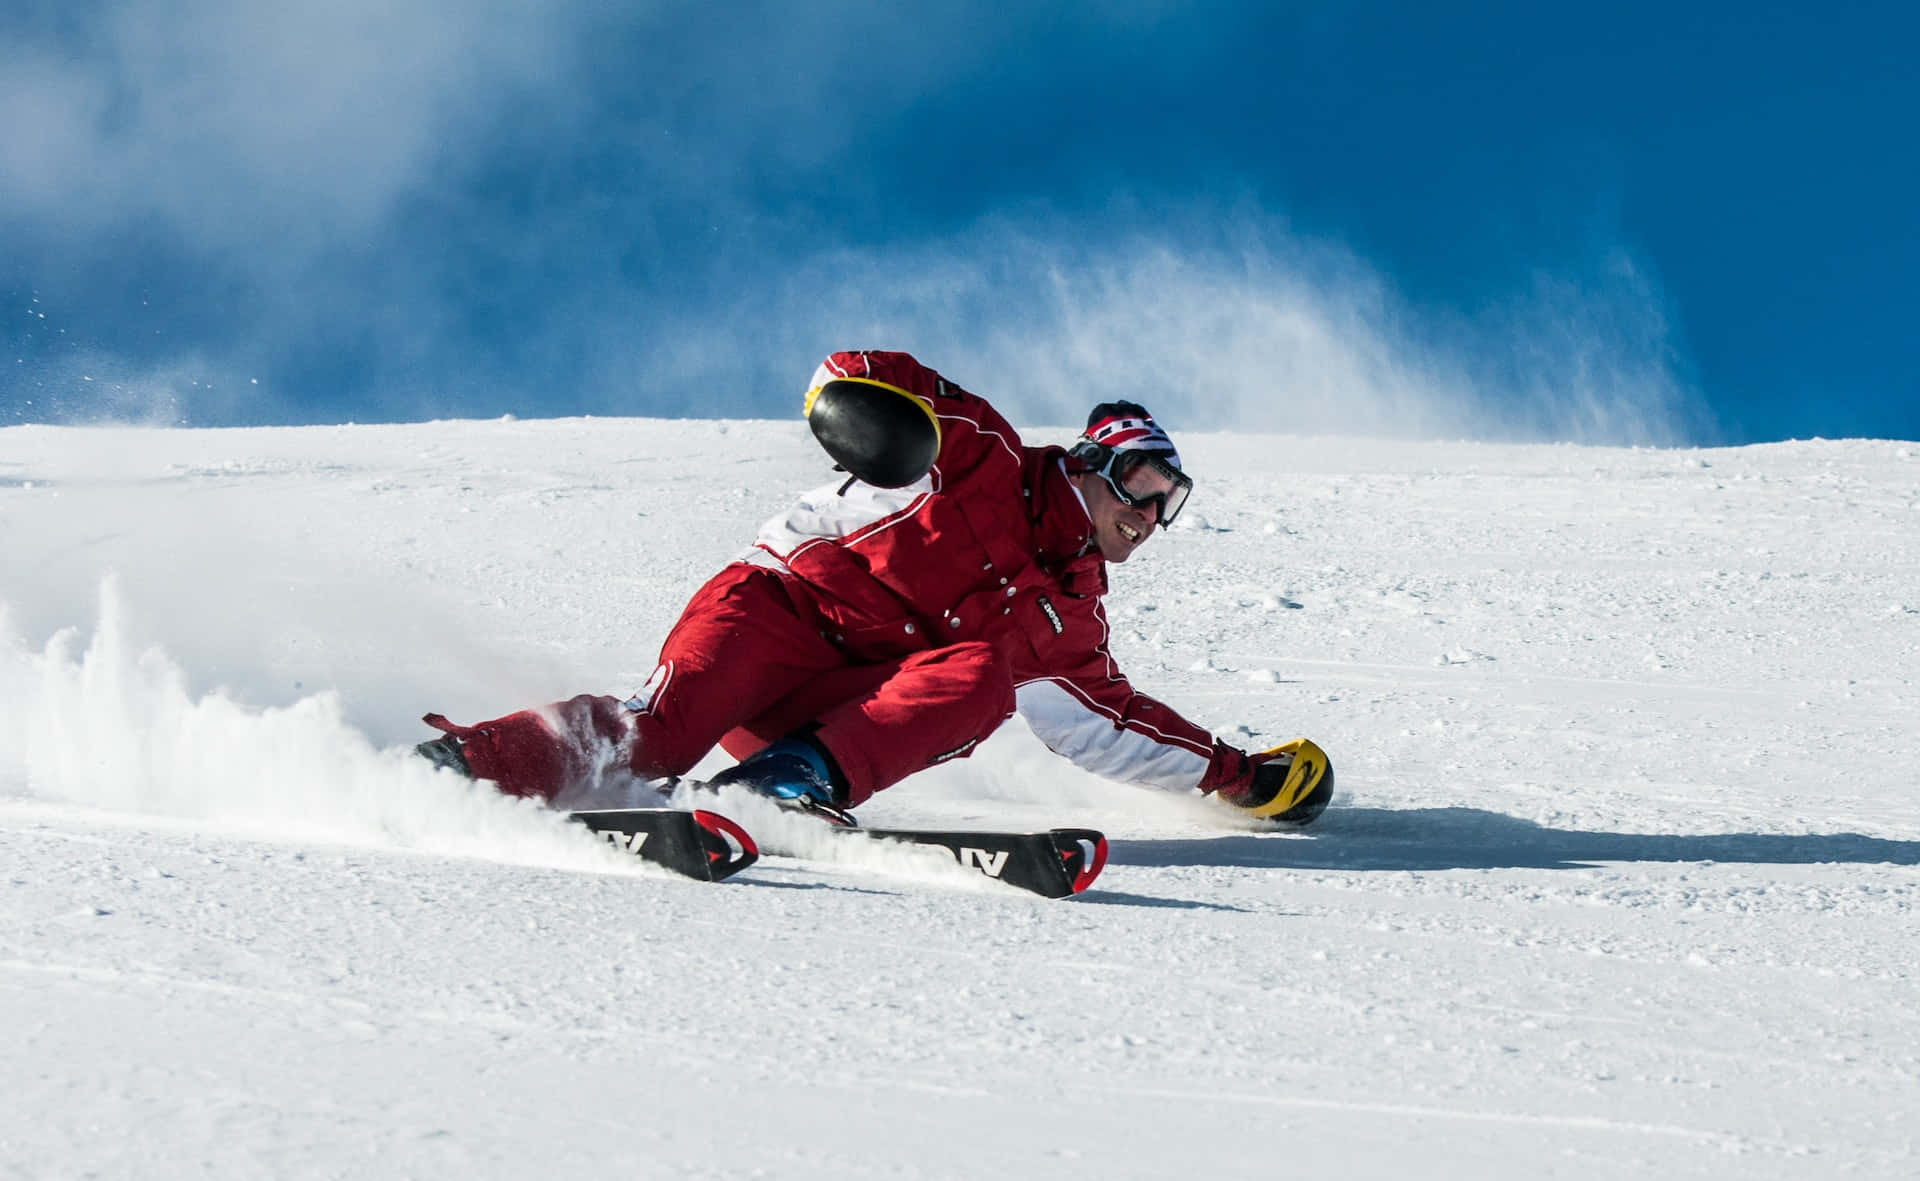 A Man Is Skiing Down A Snowy Slope